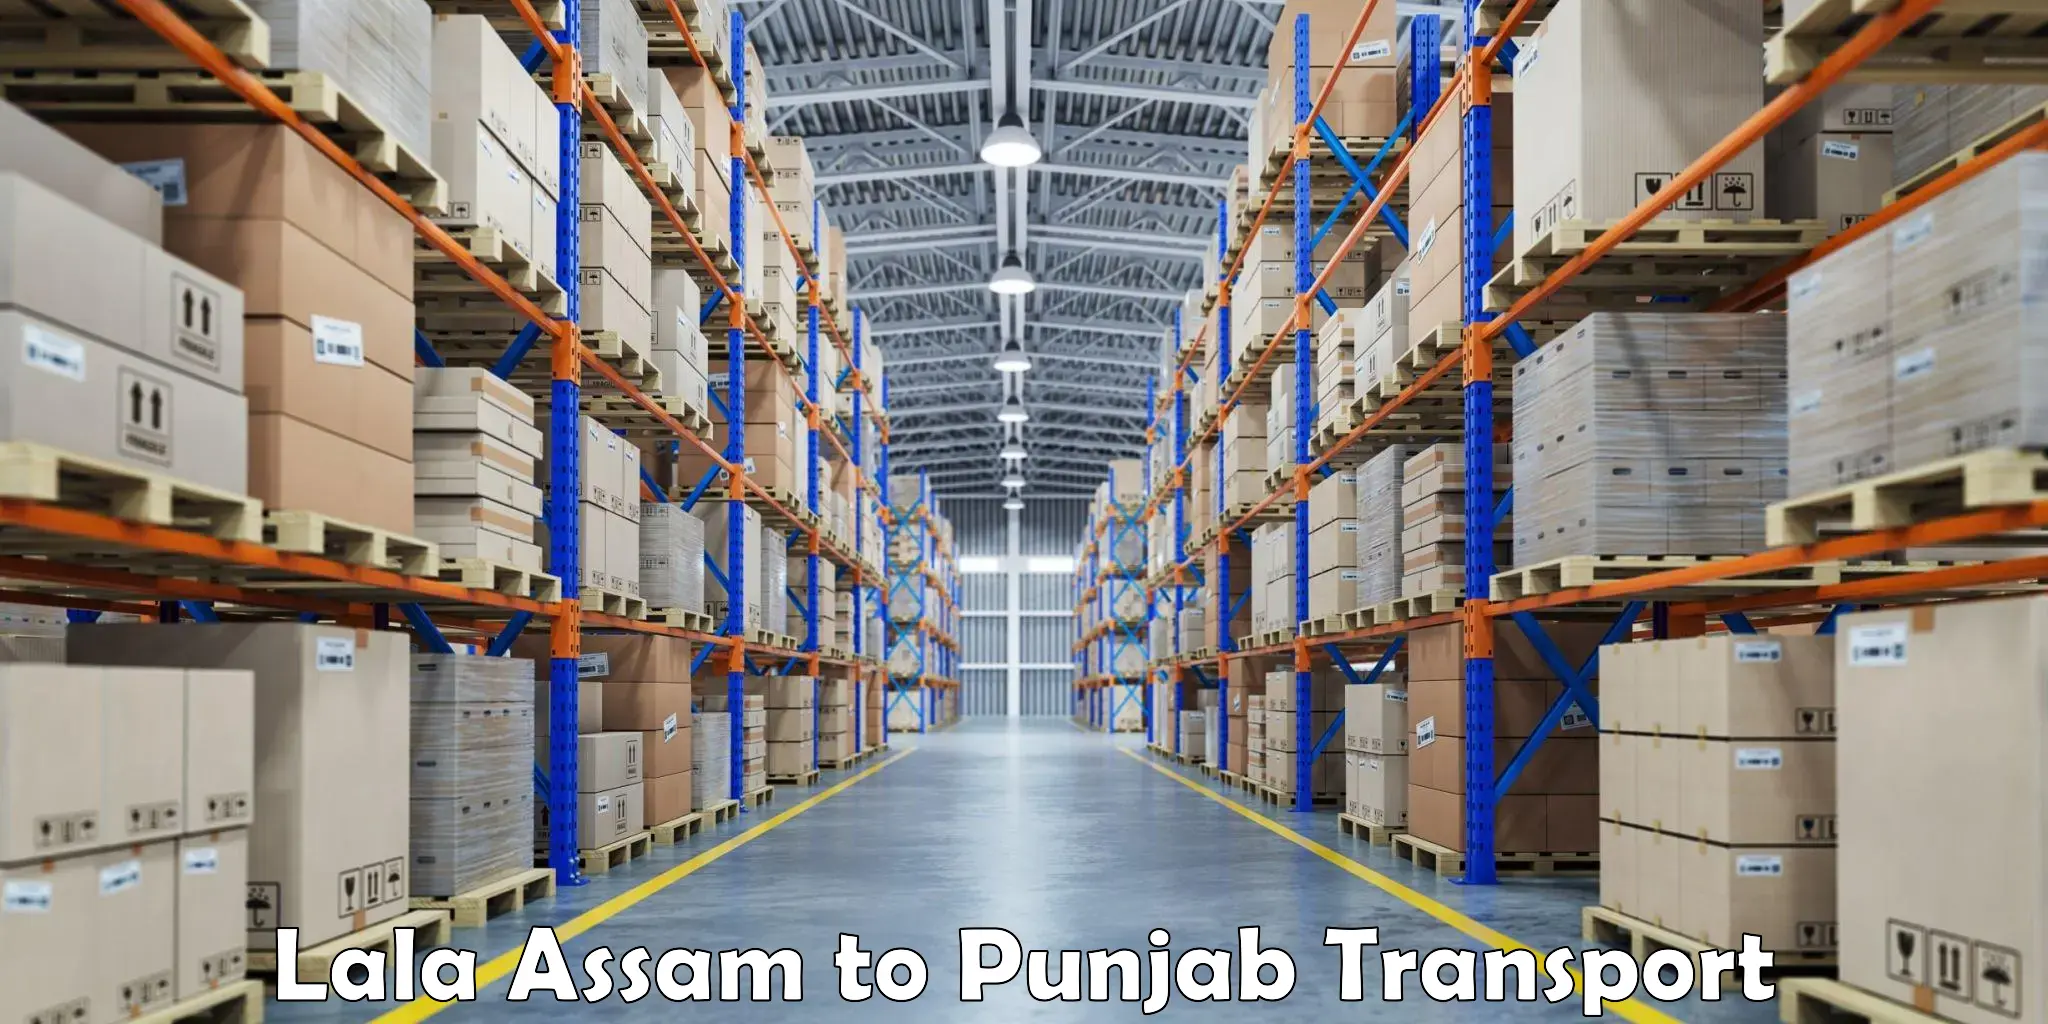 Container transport service Lala Assam to Jhunir